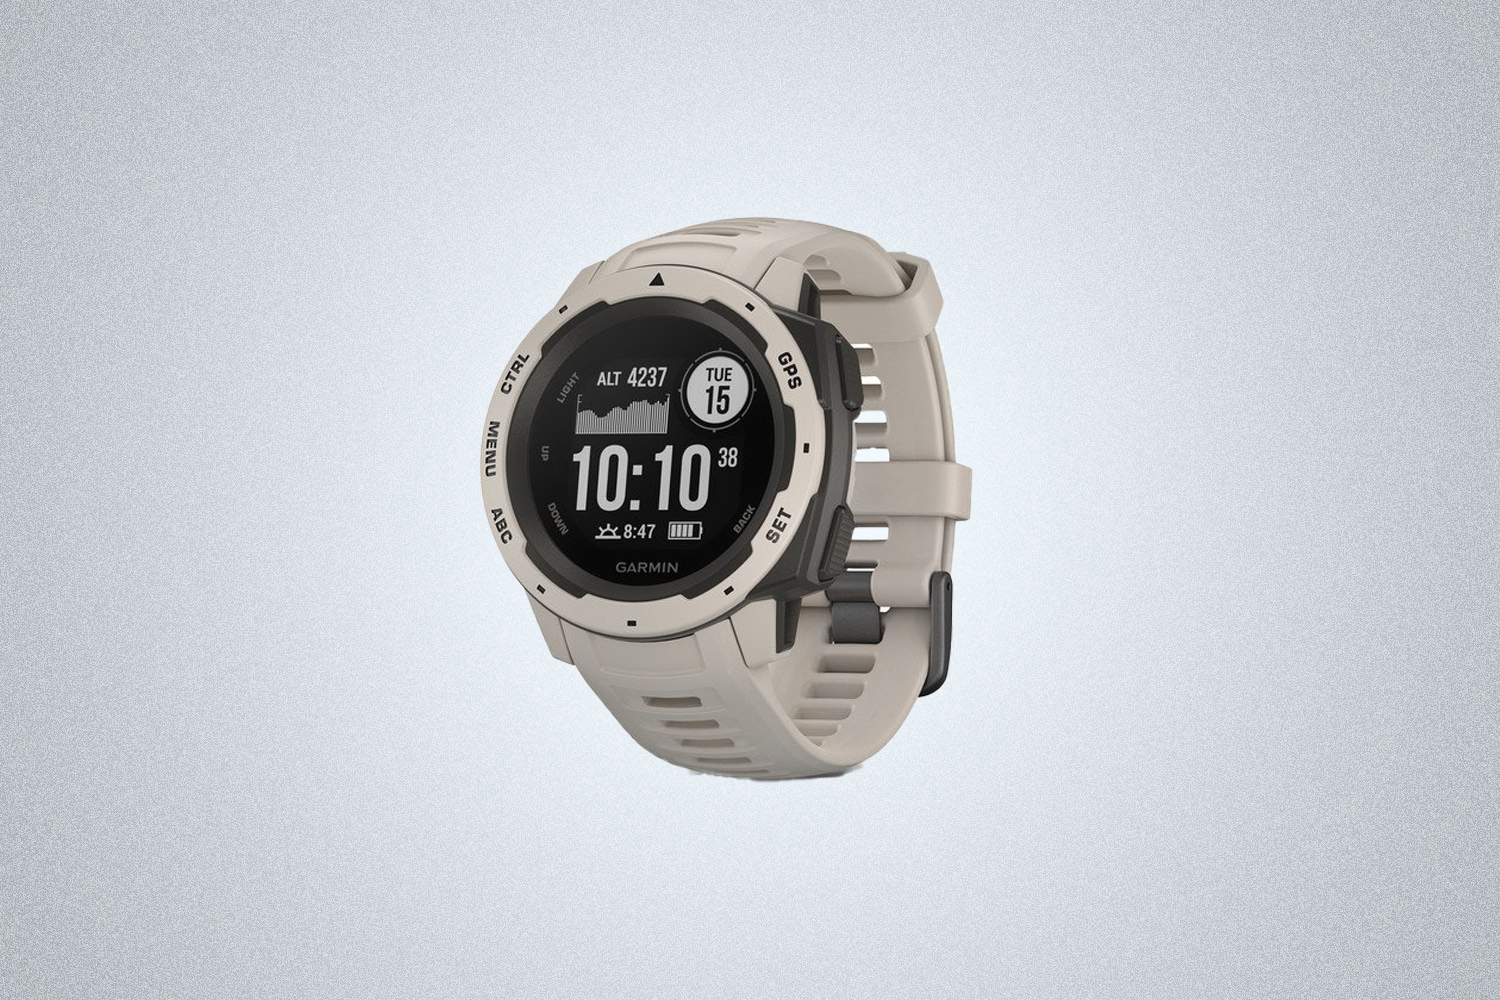 The Garmin Instinct Smartwatch in grey is one of the best fitness GPS watches in 2021 for hiking, running, swimming, cycling and working out 